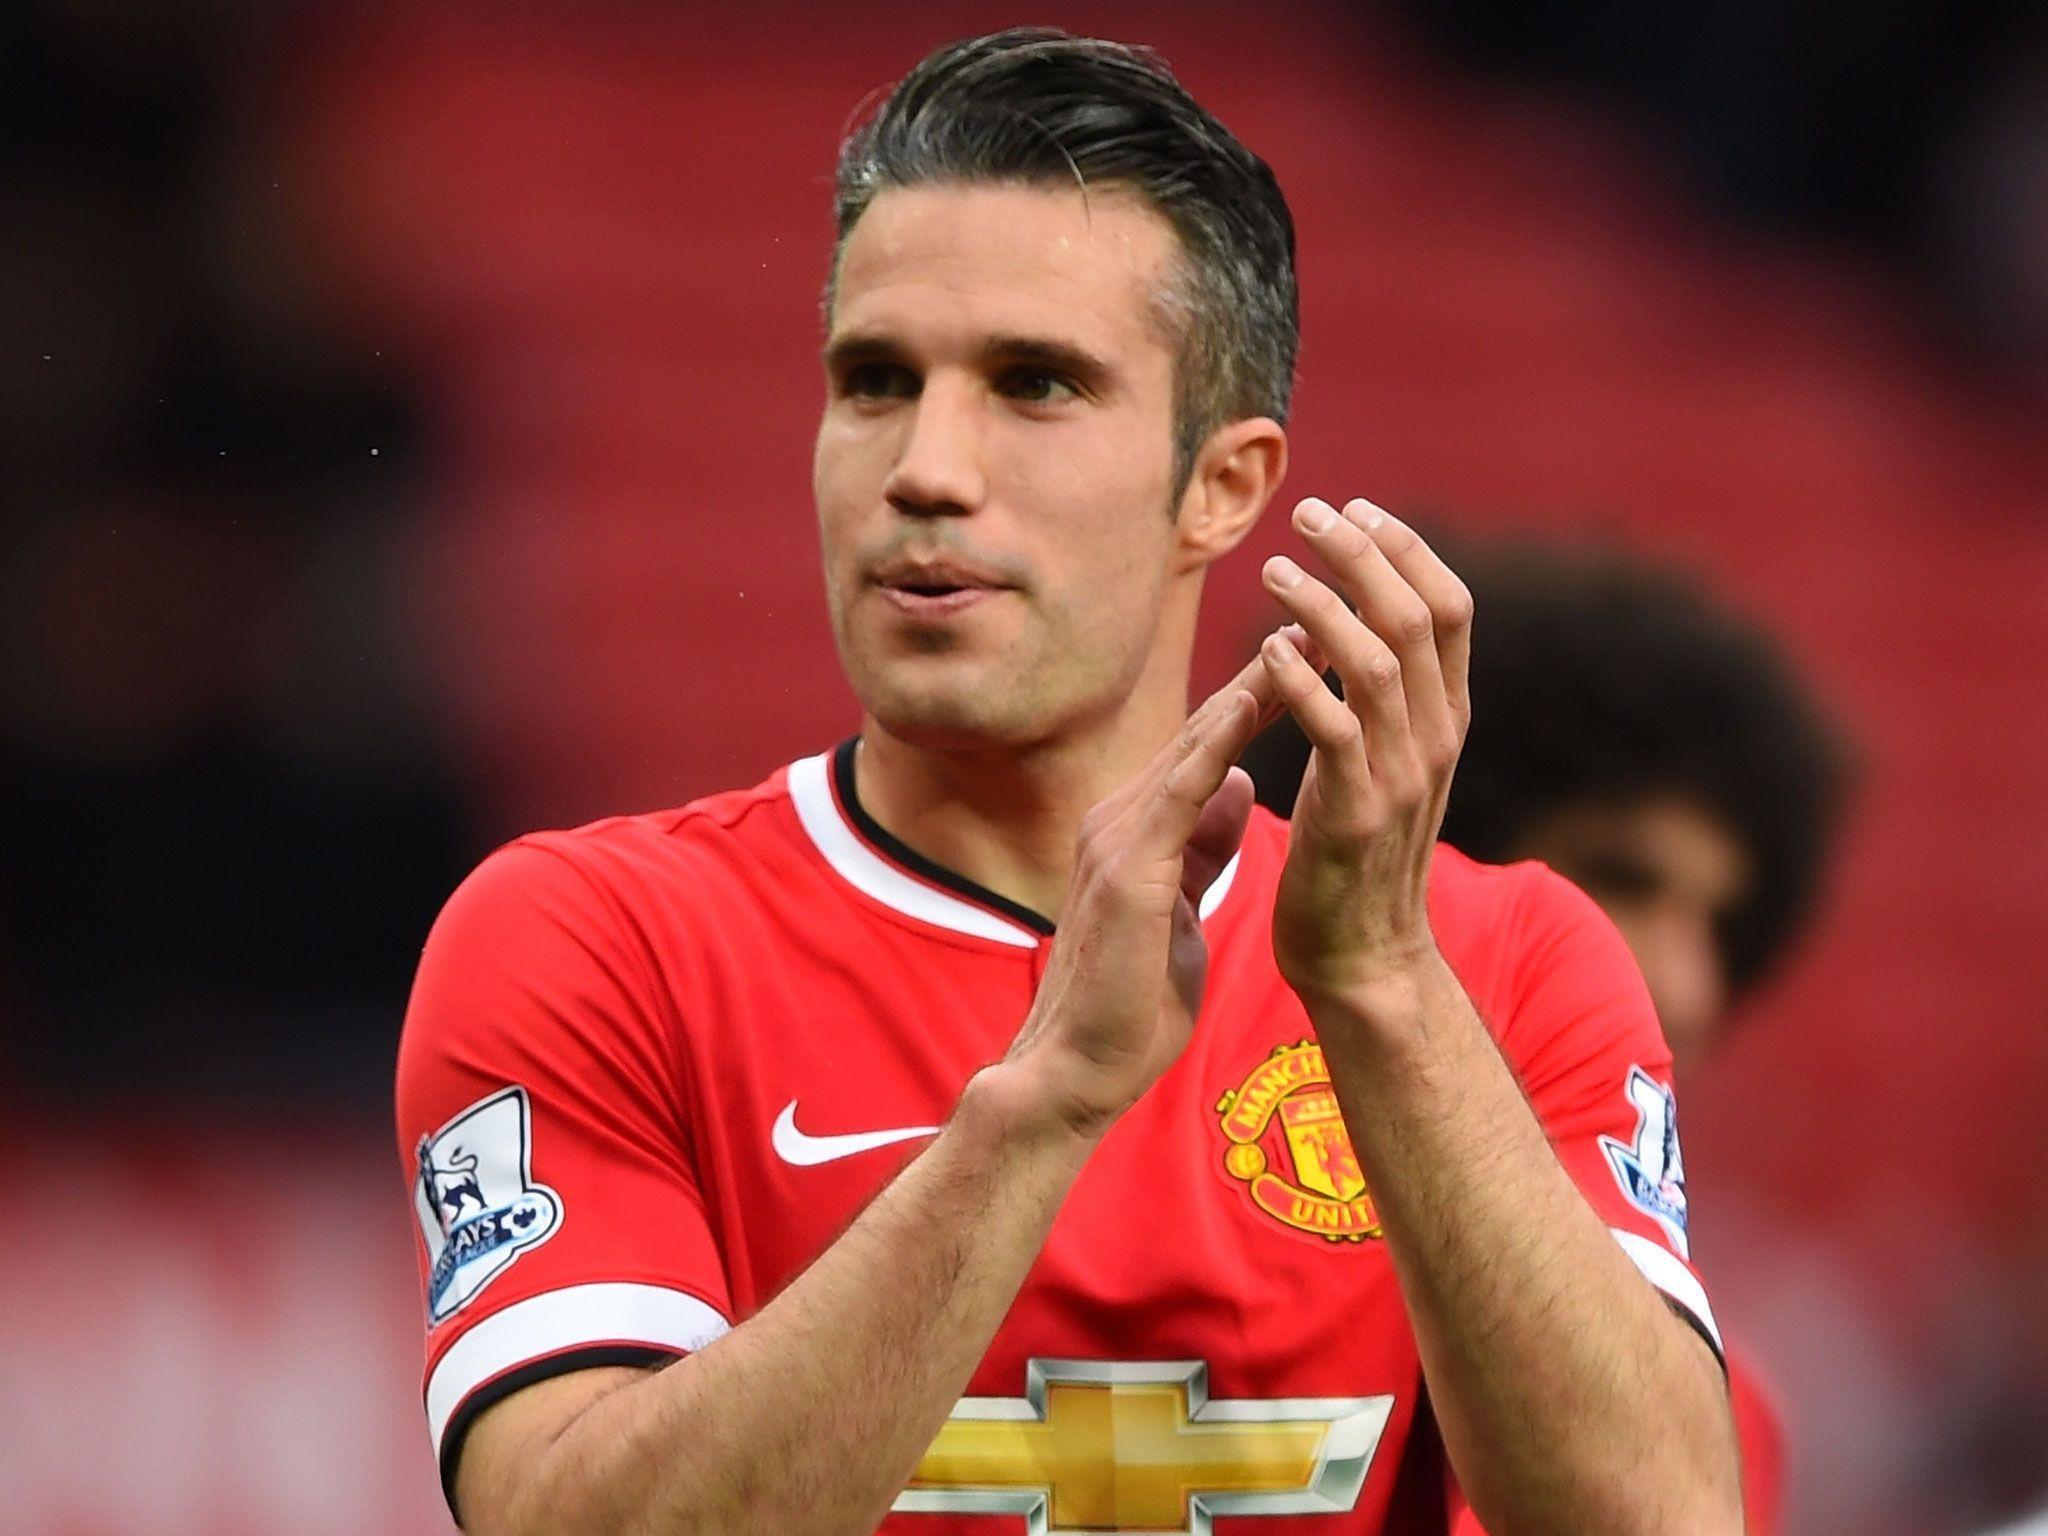 Robin van Persie to Fenerbahce: Manchester United &;agree to sell